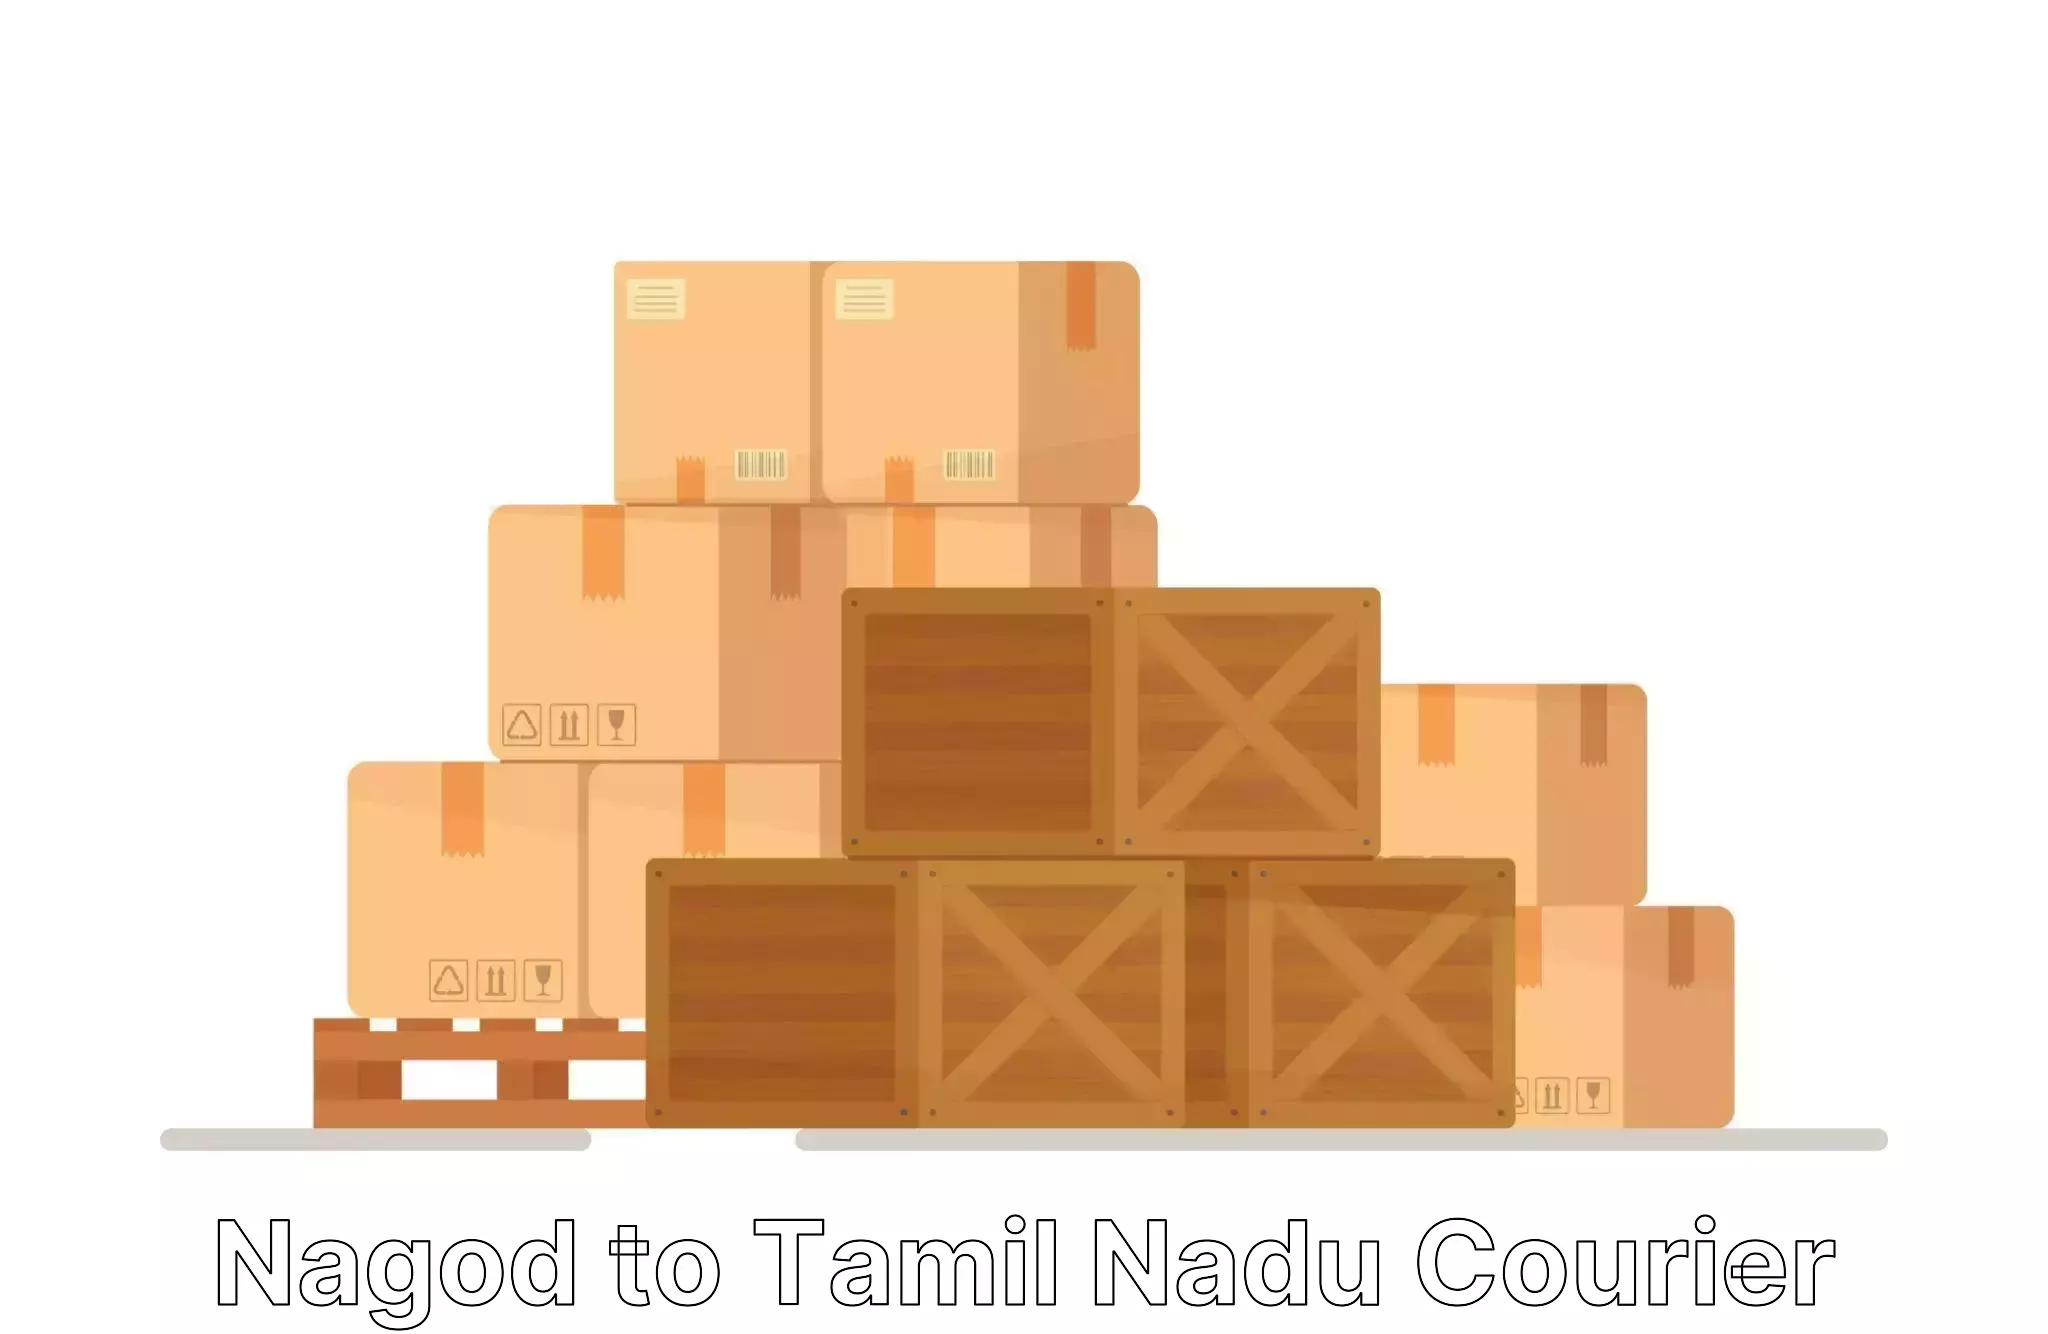 Personalized relocation plans in Nagod to Tamil Nadu